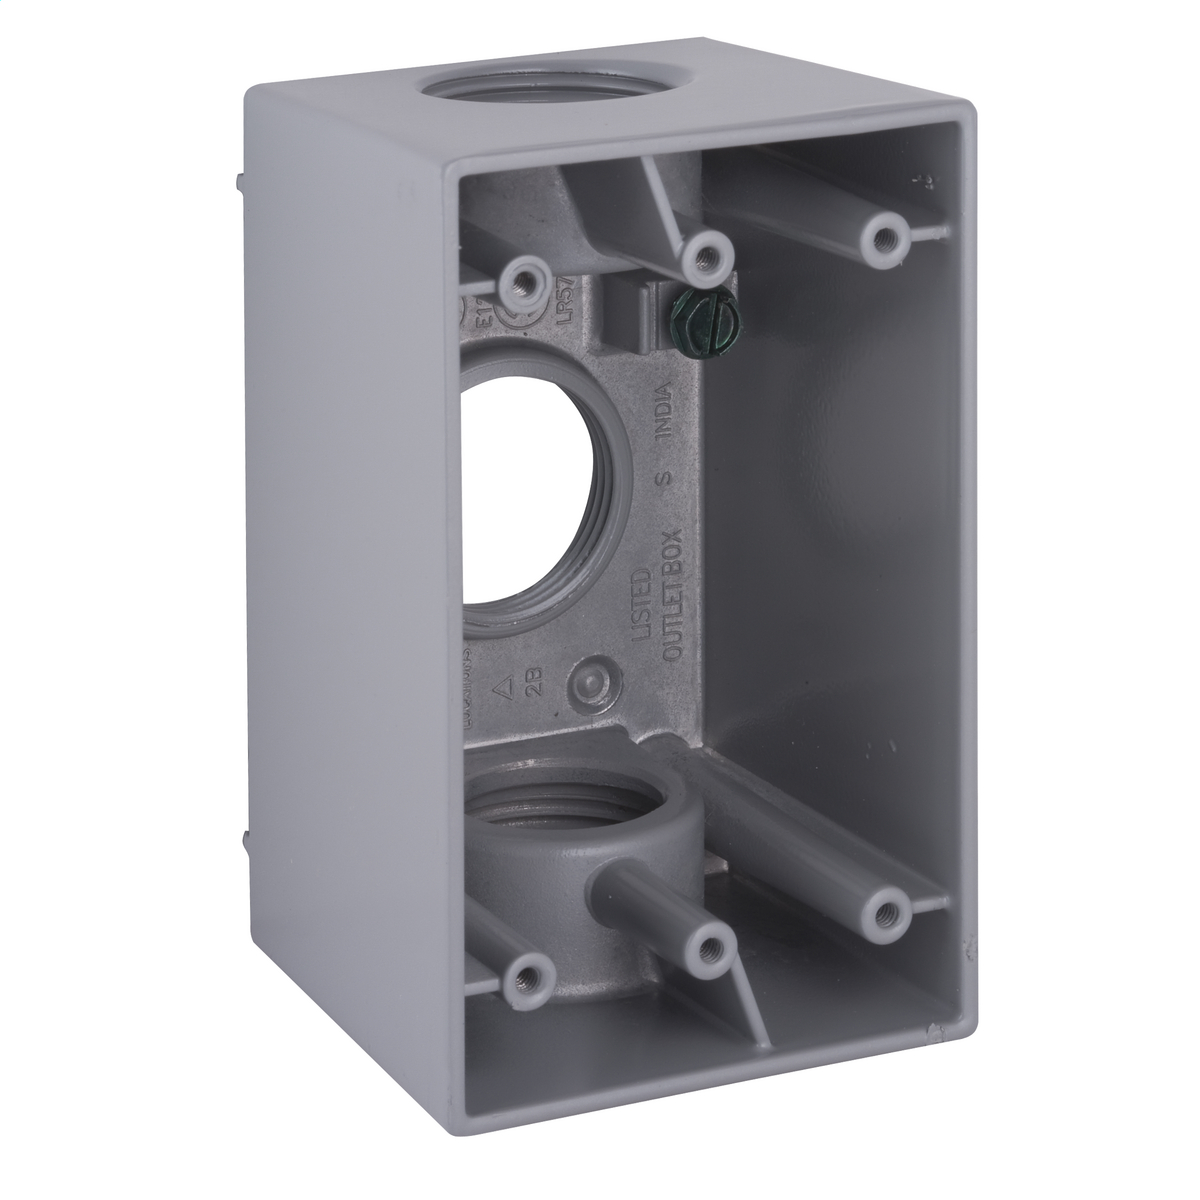 1G WP DEEP BOX (3) 1 IN. OUTLETS - GRAY